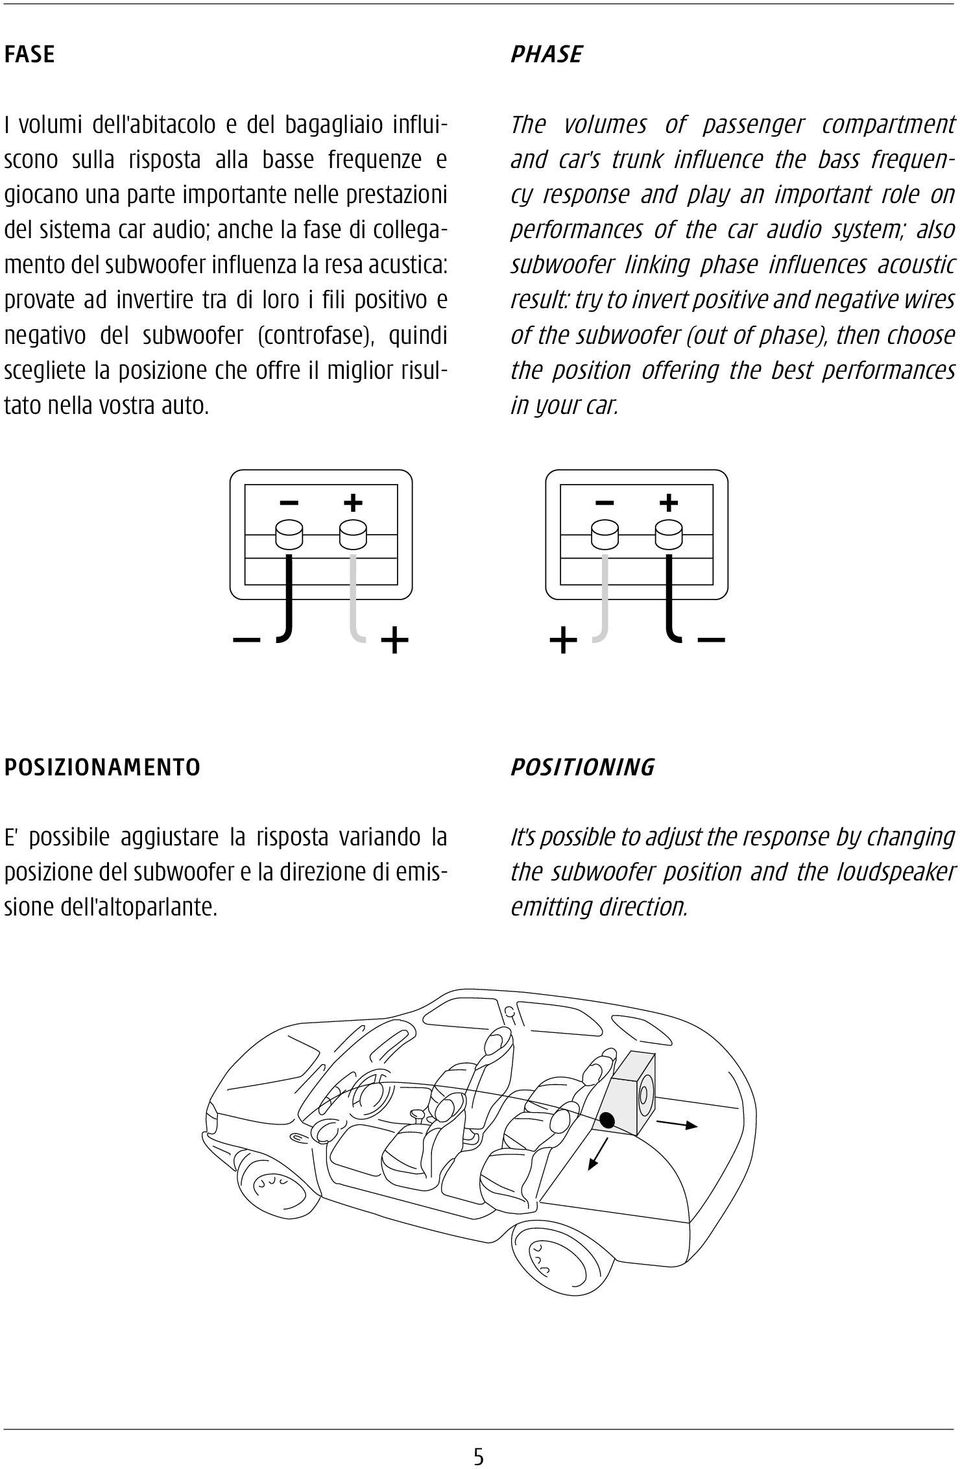 auto. PHASE The volumes of passenger compartment and car's trunk influence the bass frequency response and play an important role on performances of the car audio system; also subwoofer linking phase